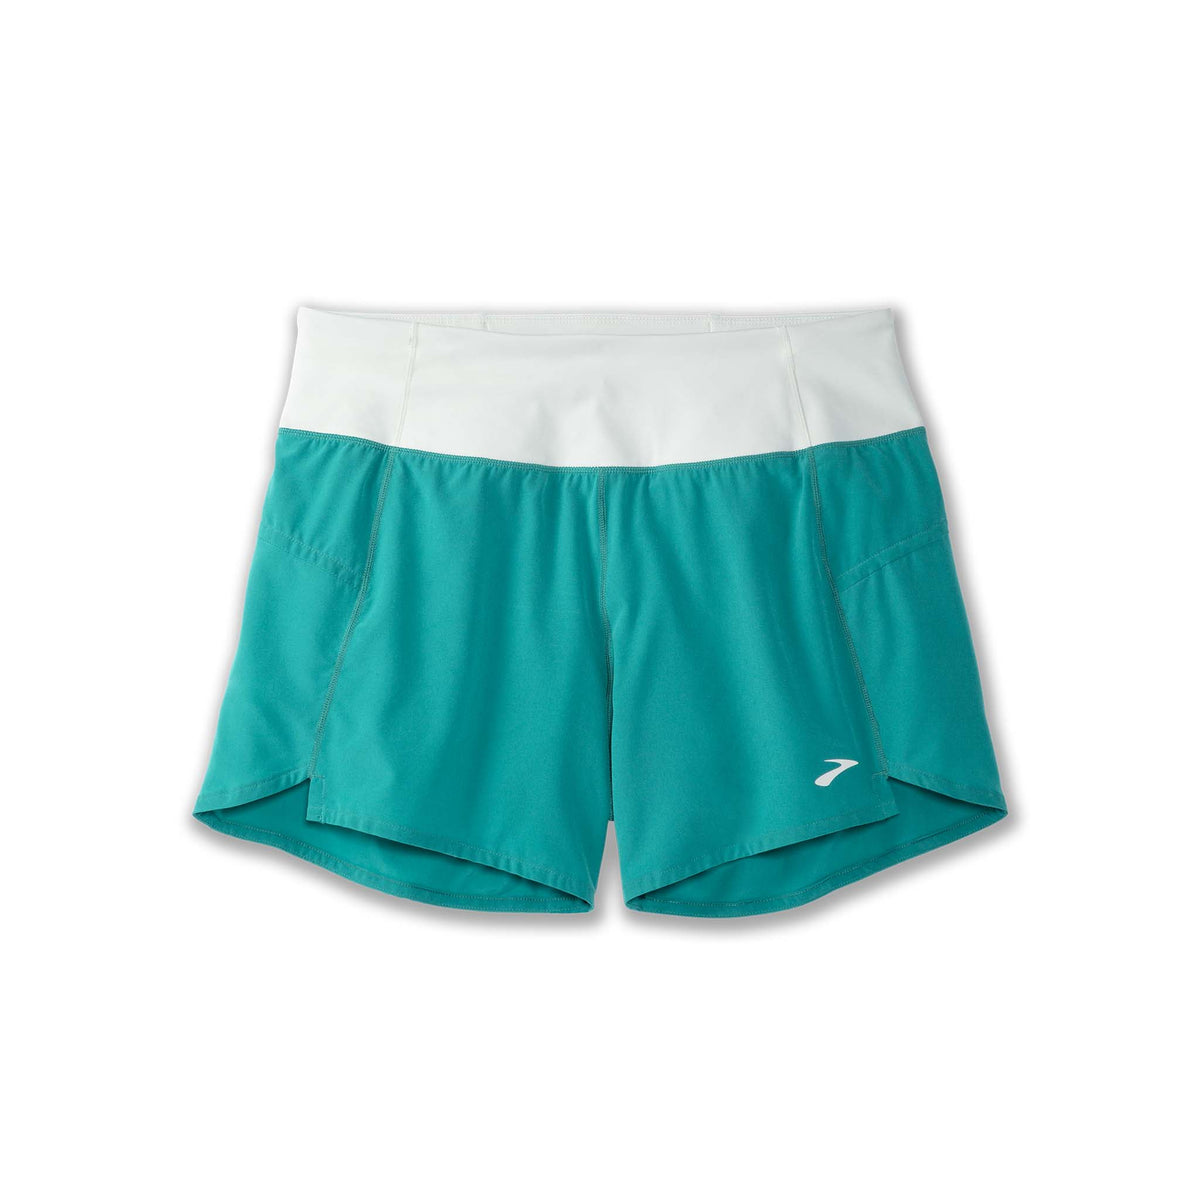 Moment 5 inch 2-in-1 Women's Running Shorts